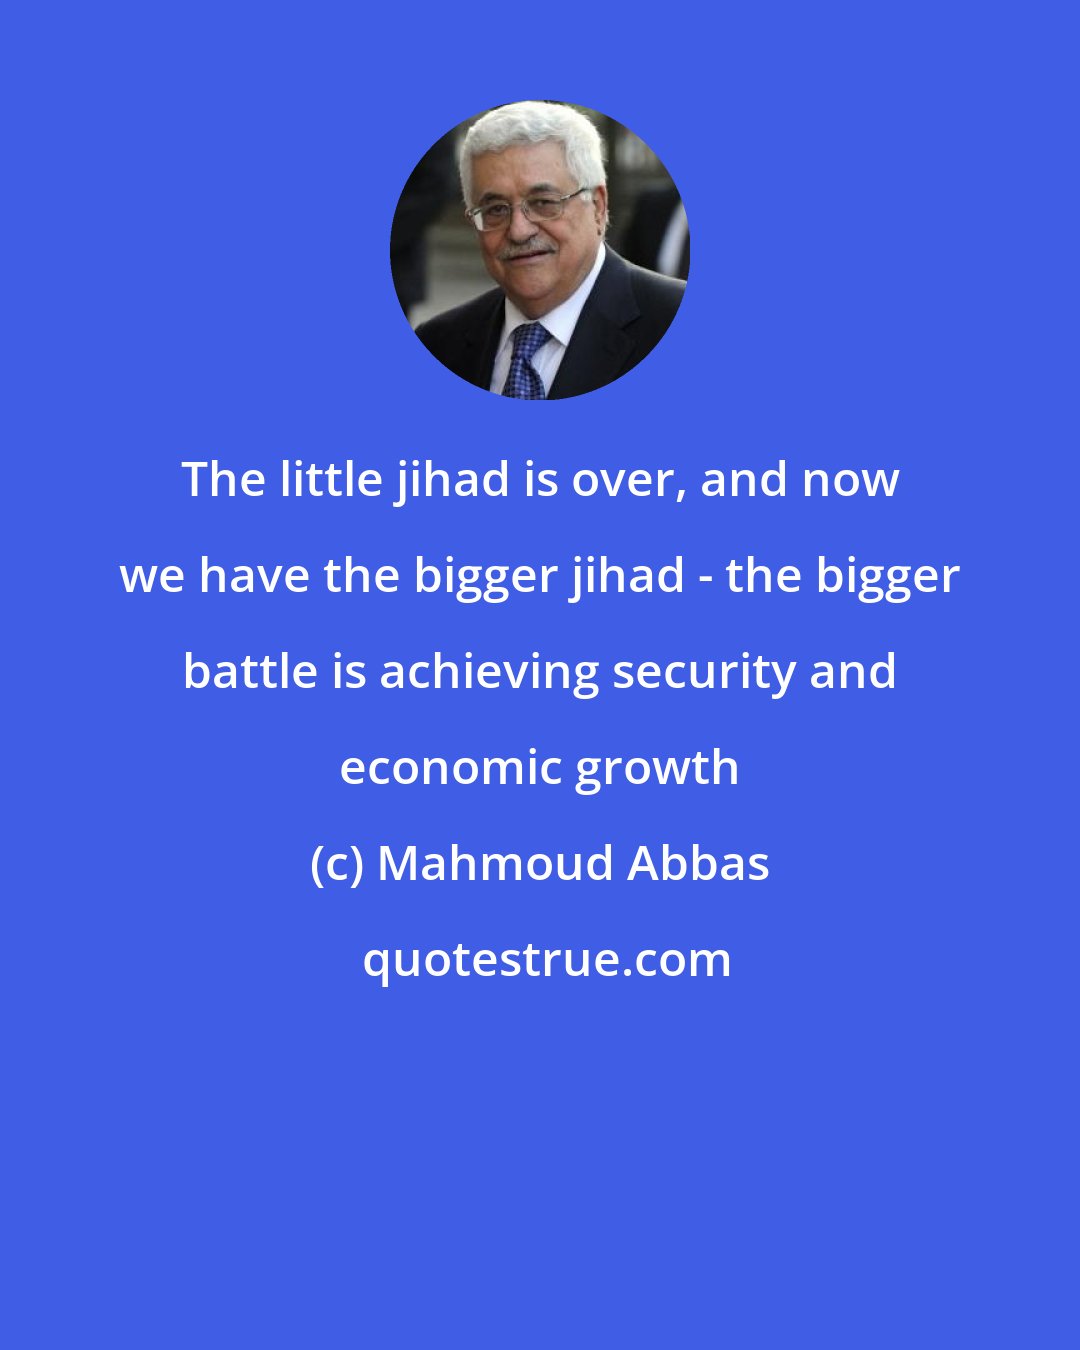 Mahmoud Abbas: The little jihad is over, and now we have the bigger jihad - the bigger battle is achieving security and economic growth